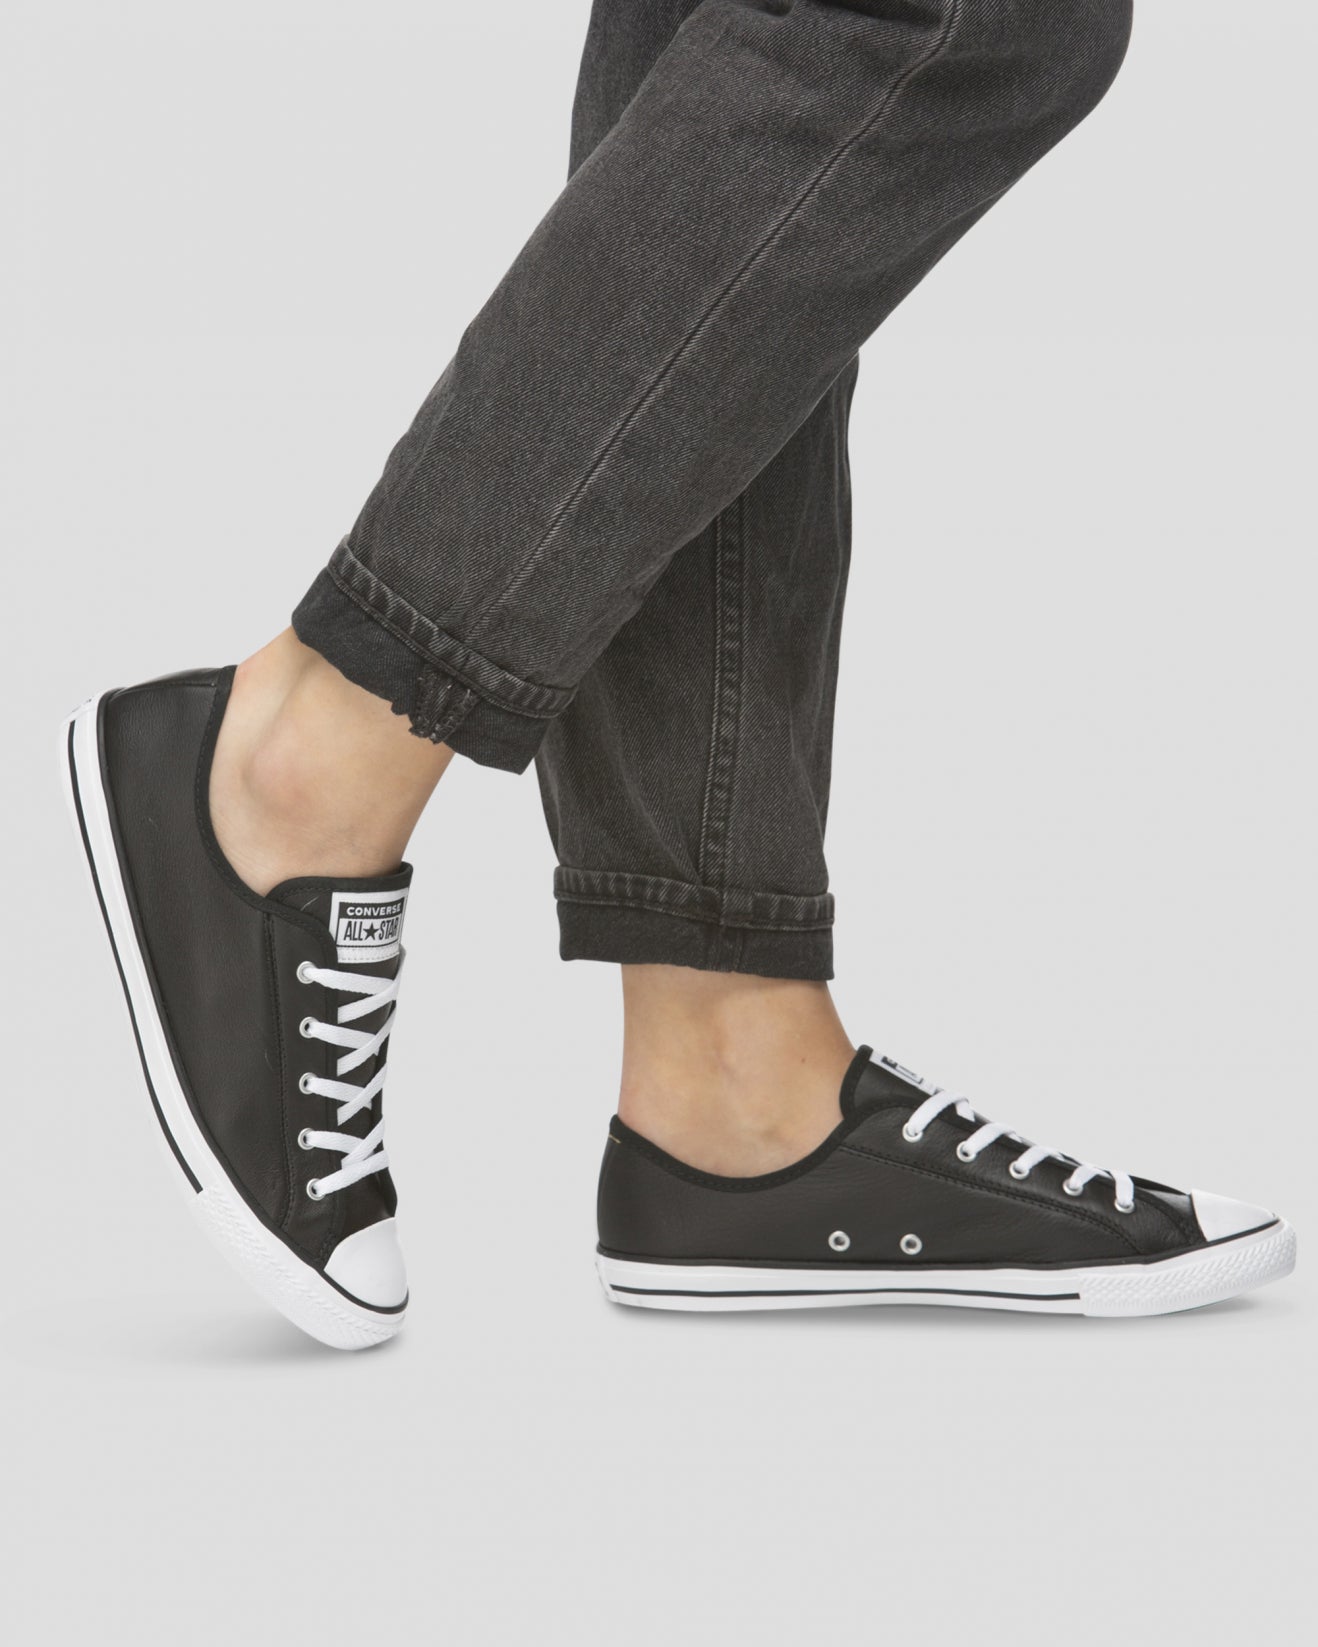 converse all star dainty black leather 